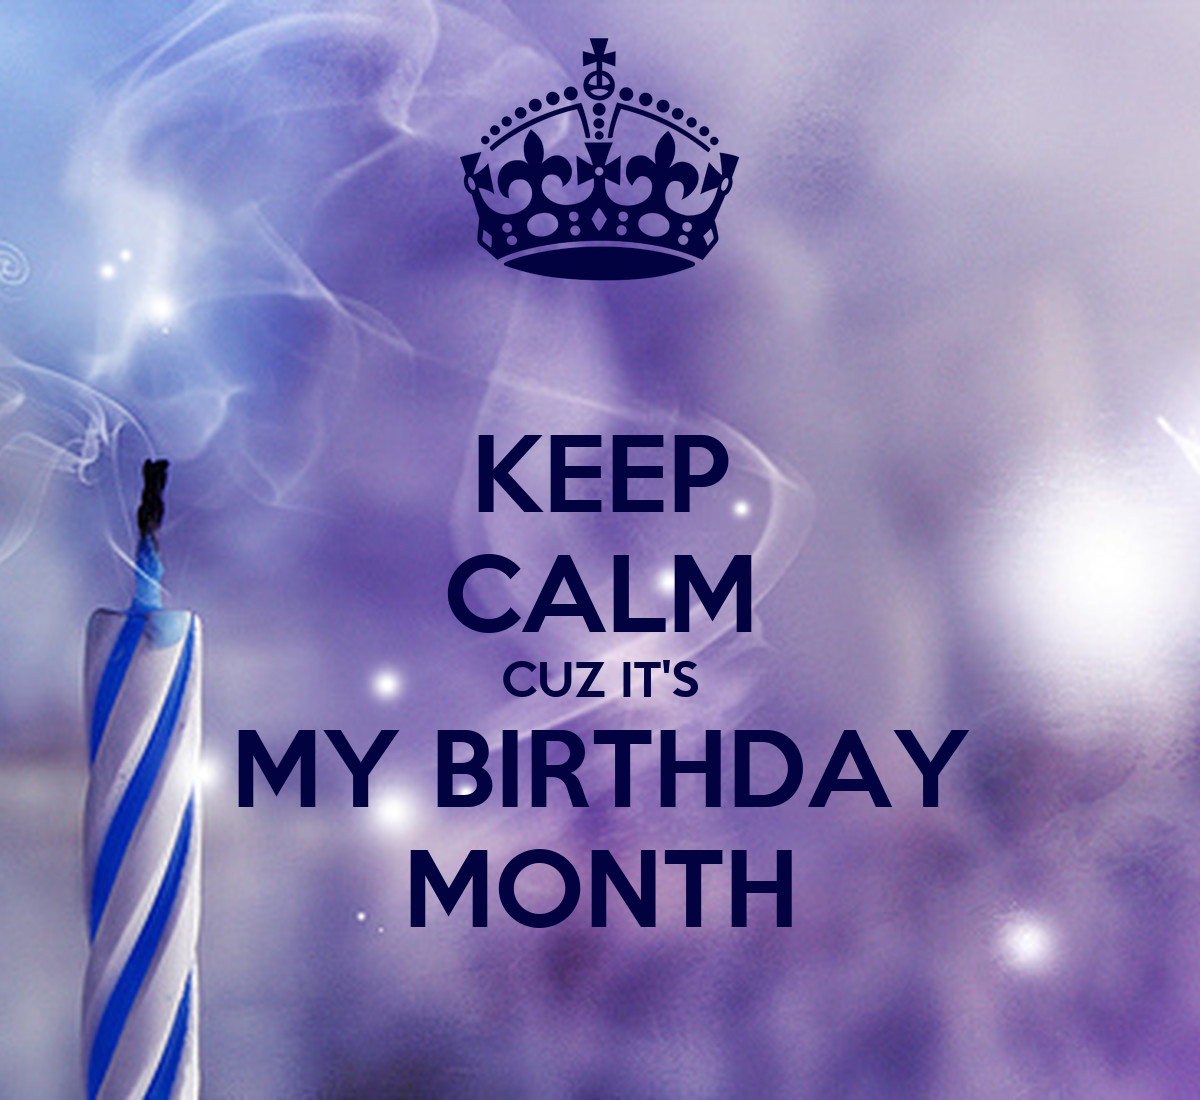 My Birthday Month Quotes
 KEEP CALM CUZ IT S MY BIRTHDAY MONTH Poster